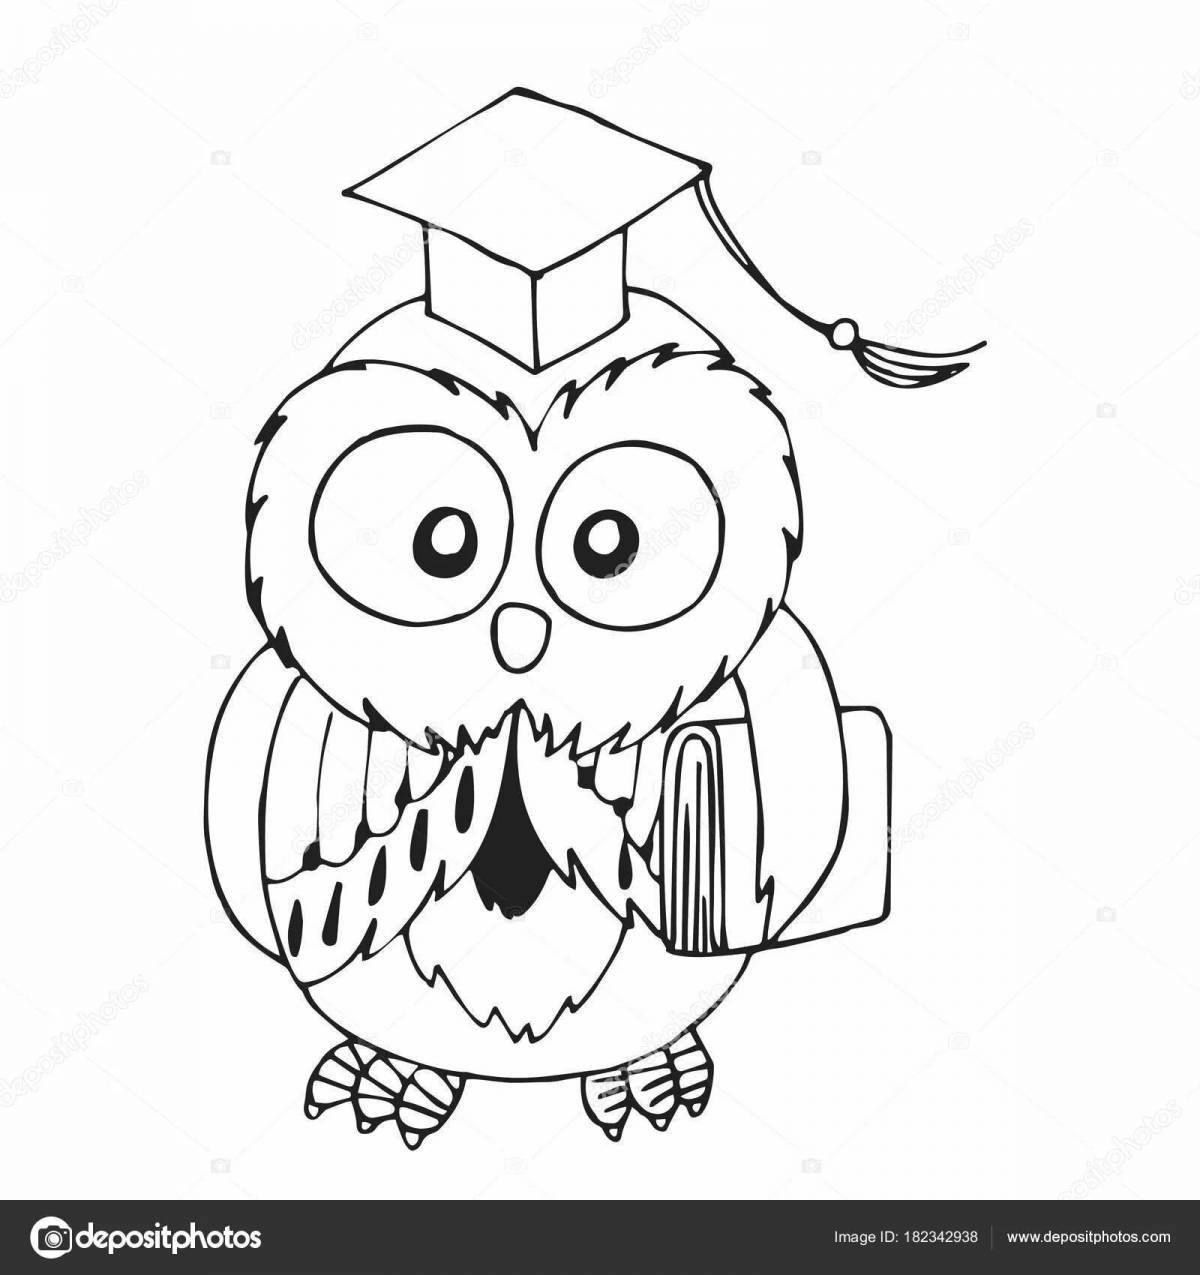 Great owl coloring with books